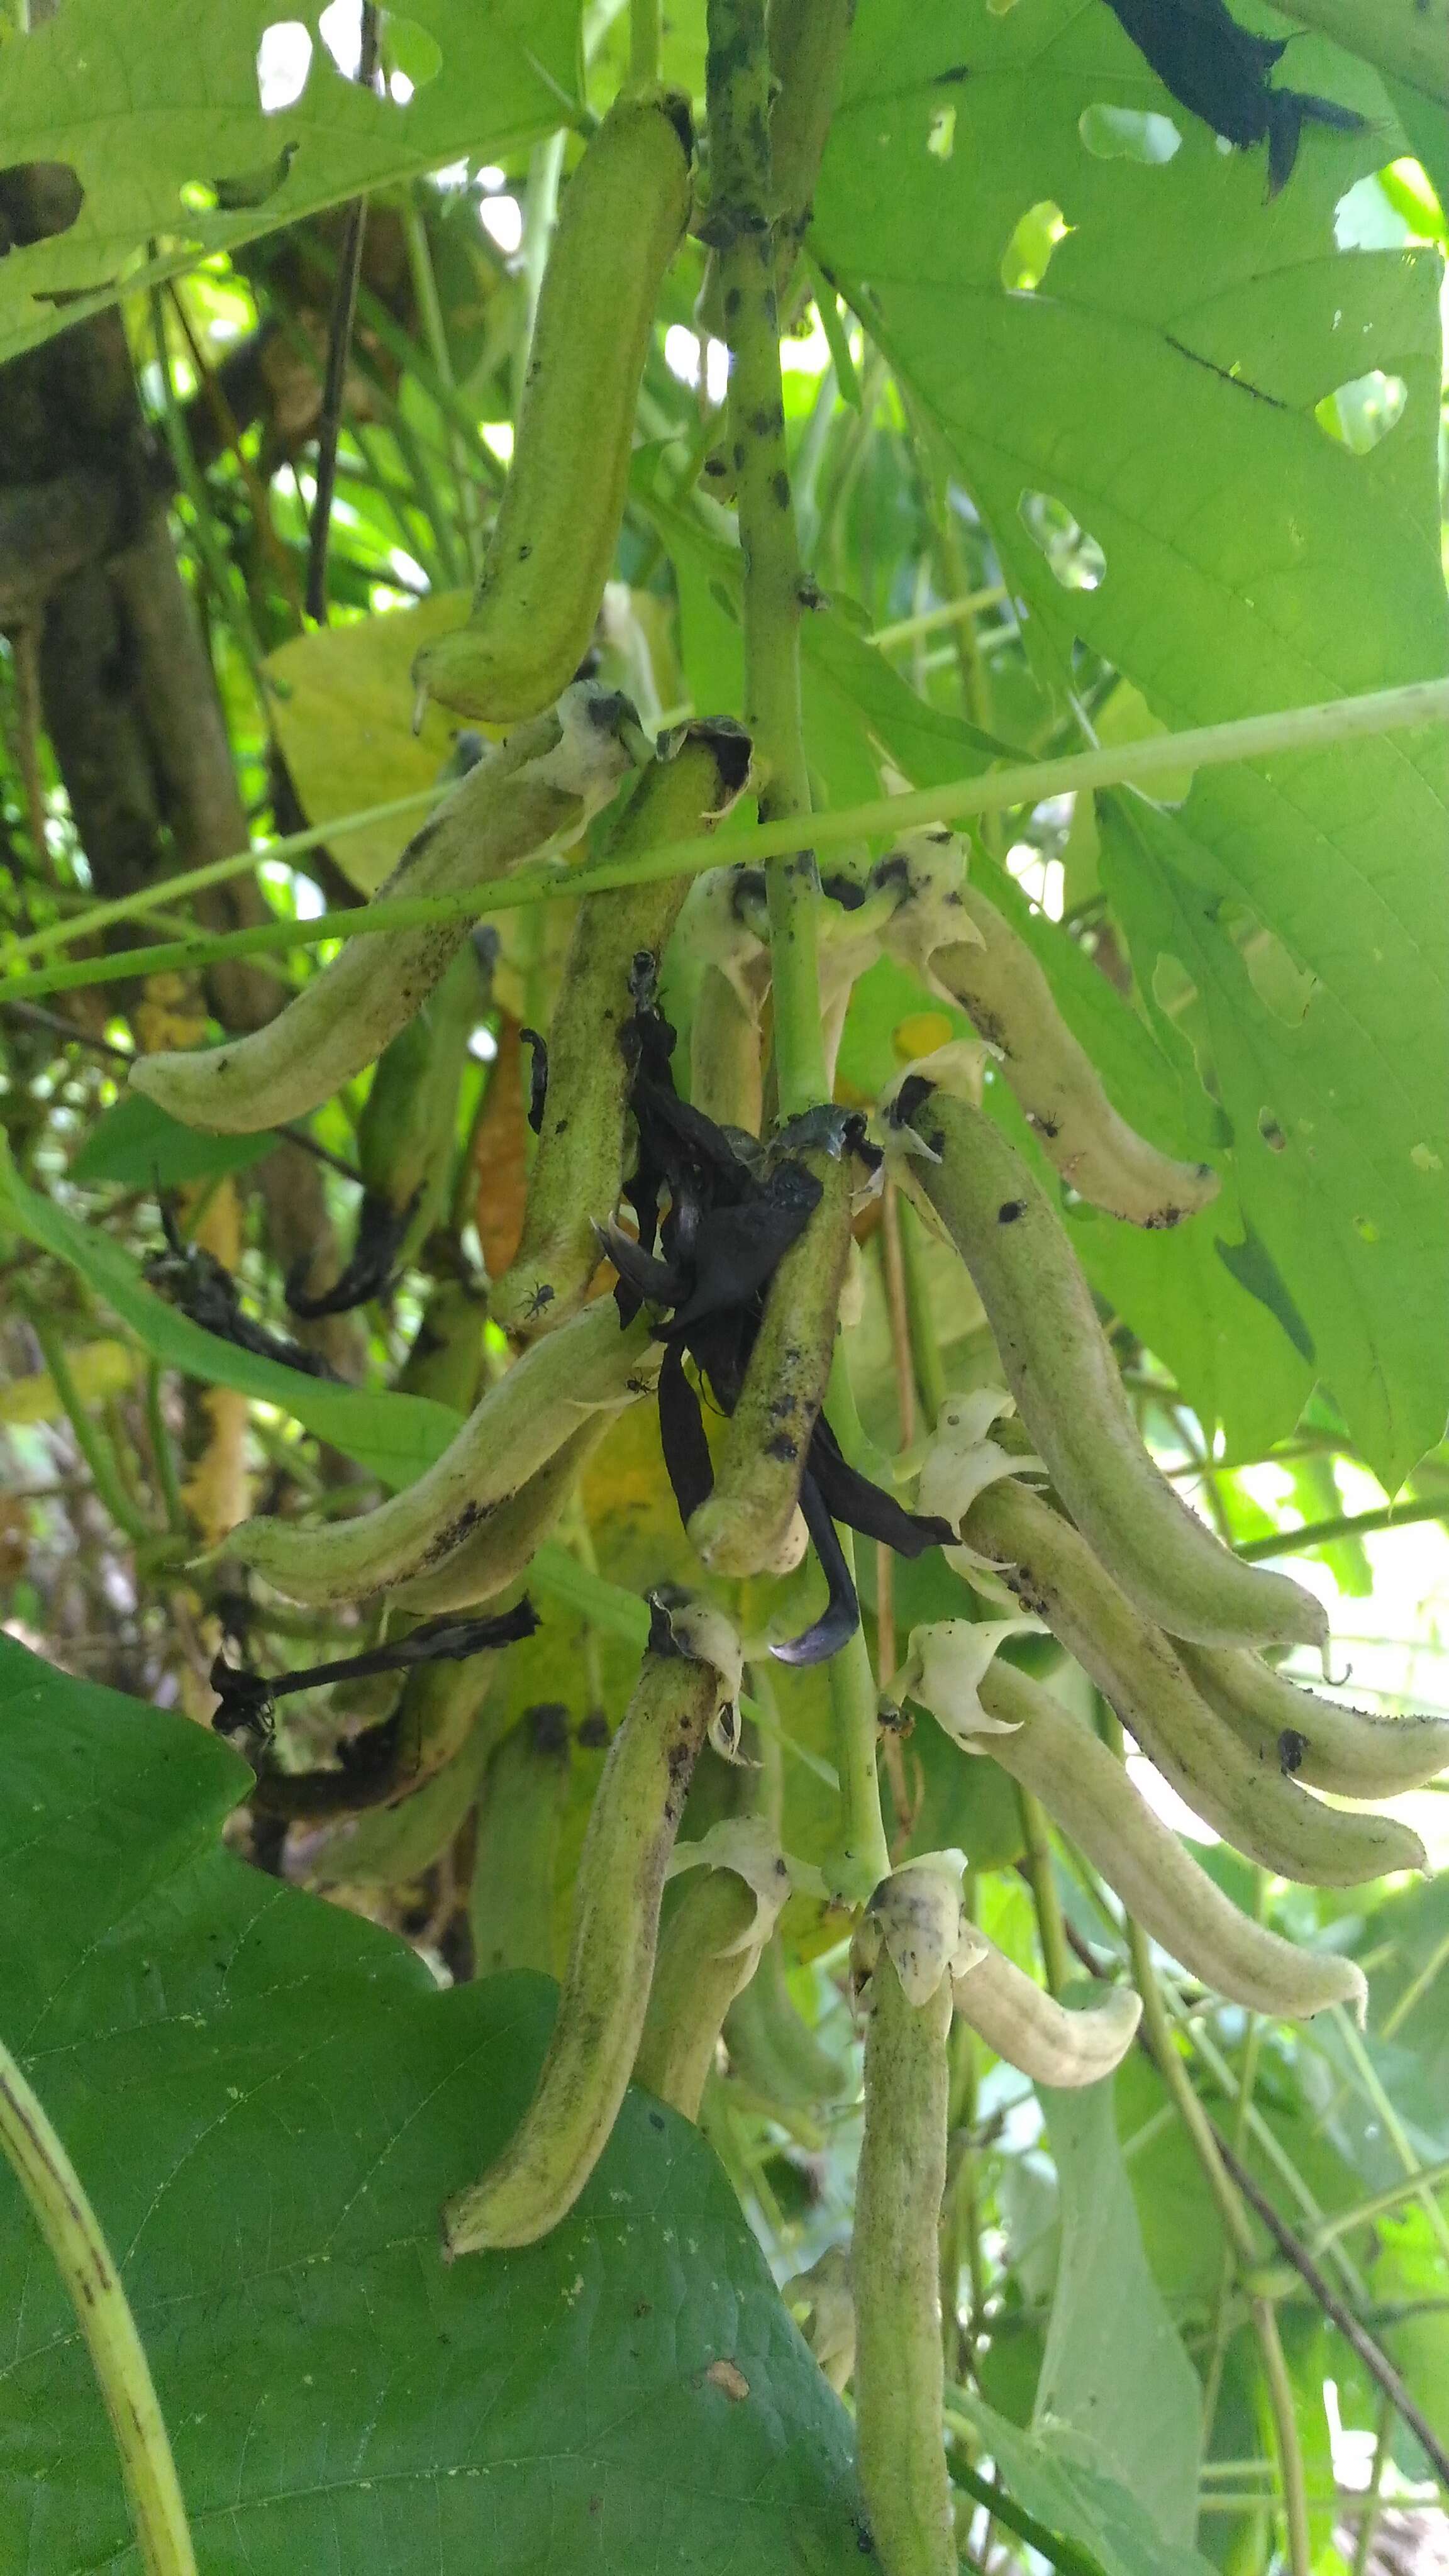 Image of soybean